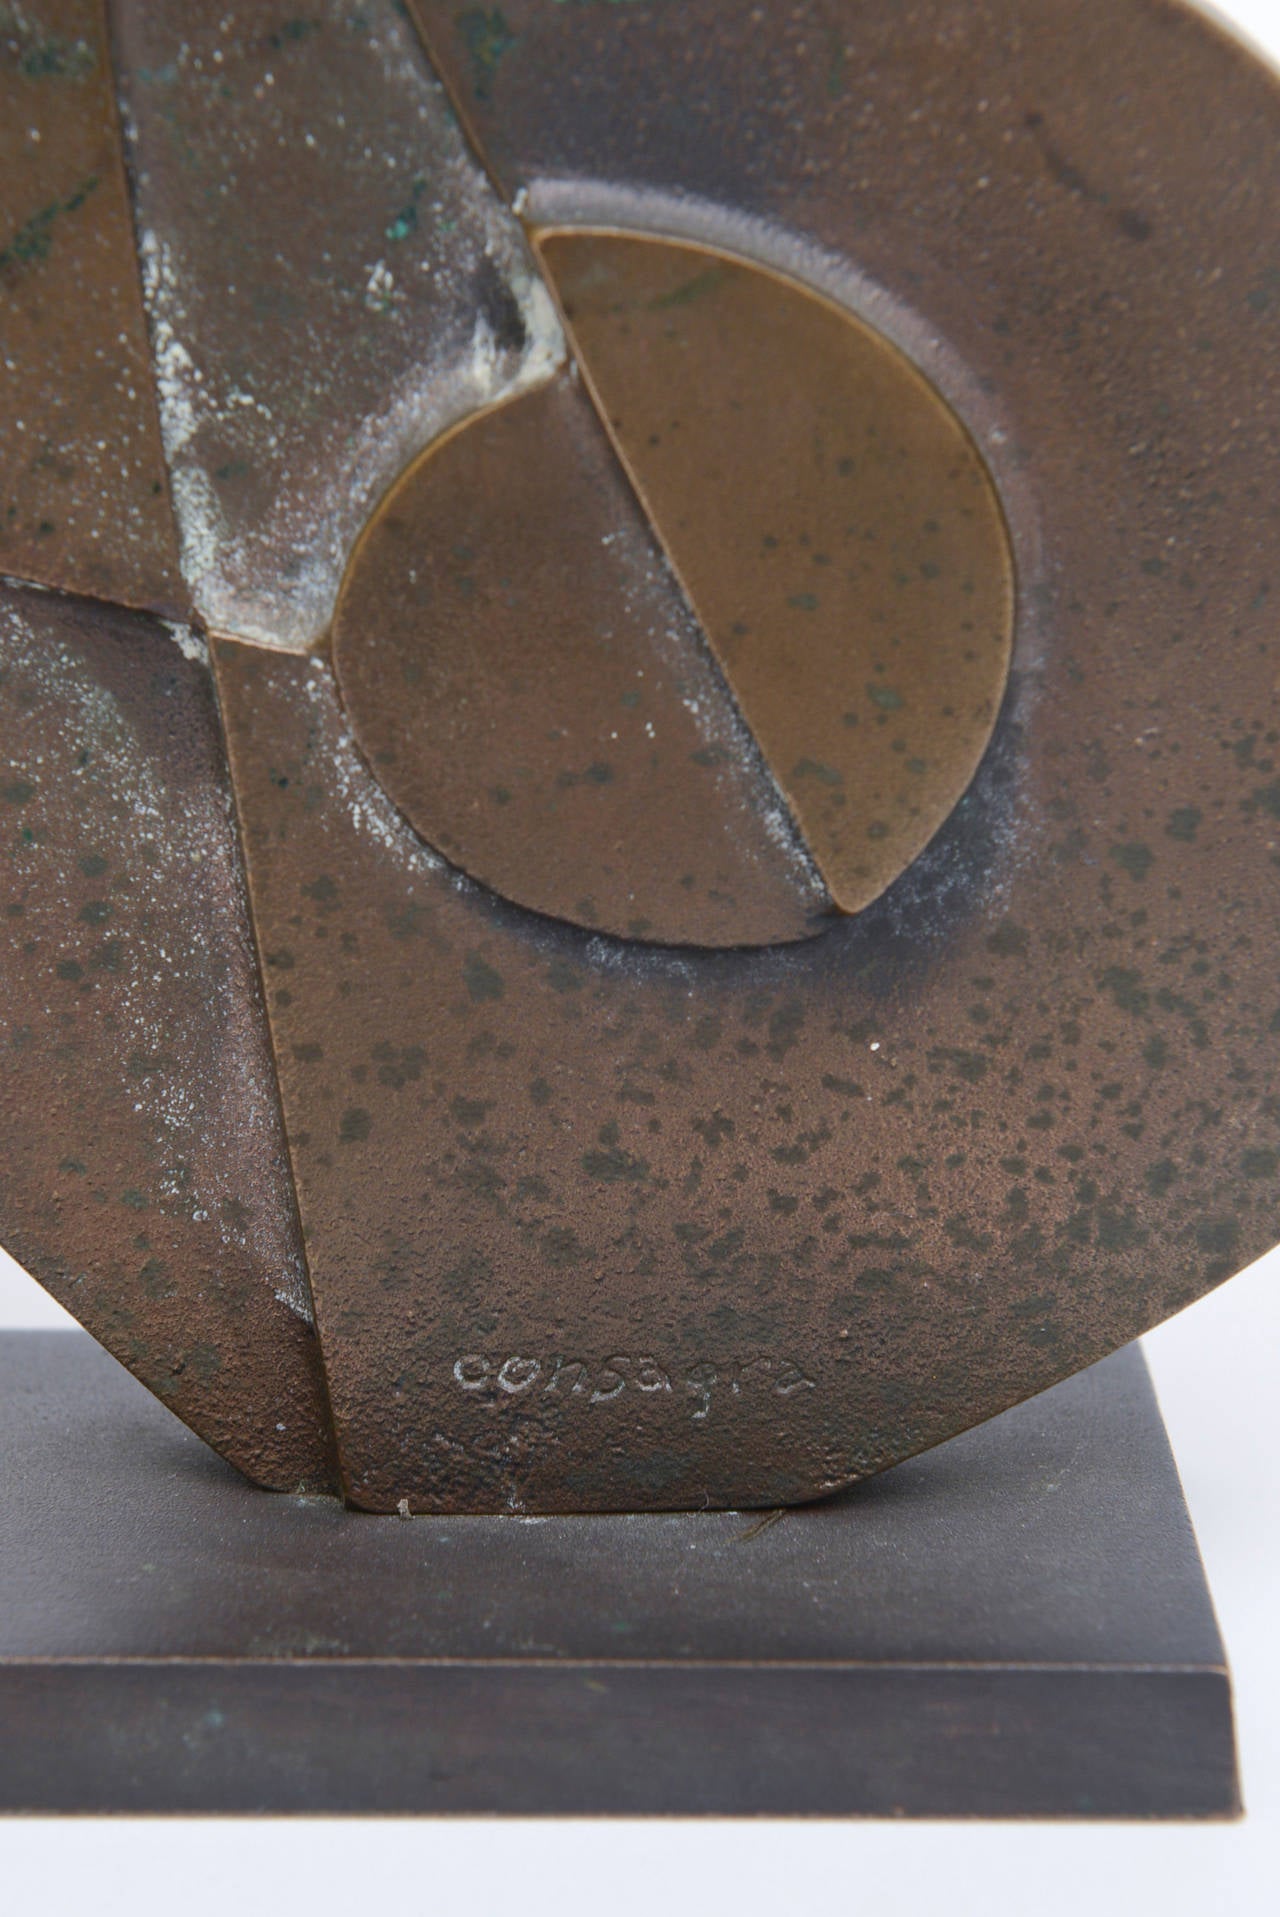 Mid-20th Century Consagra Signed Vintage Abstract Modernist and Cubist Bronze Sculpture Italian